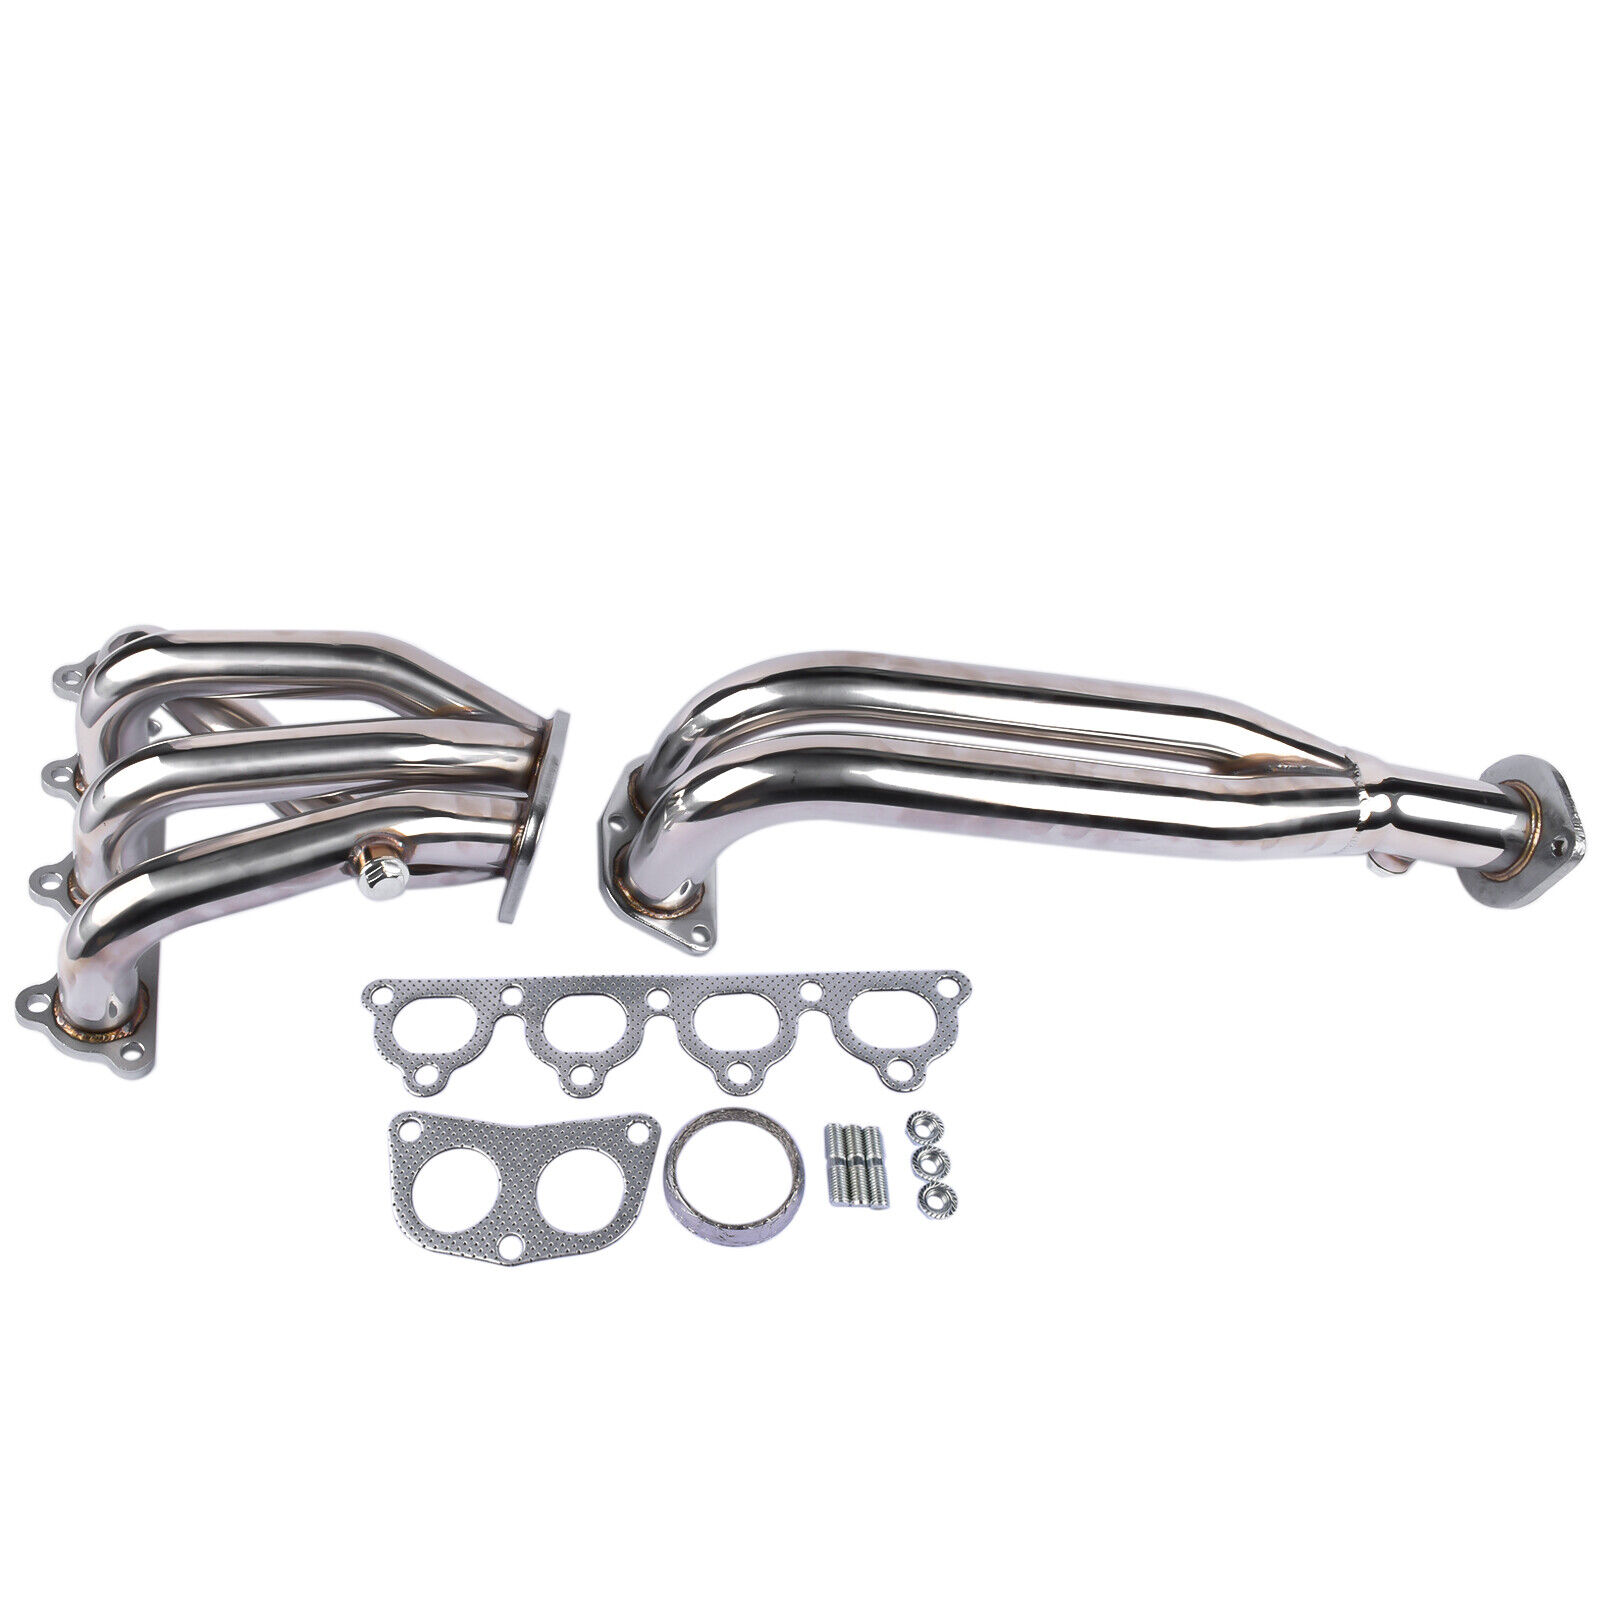 Header Exhaust System with Gaskets for Honda Del Sol 93-97 D-series Engine SOHC